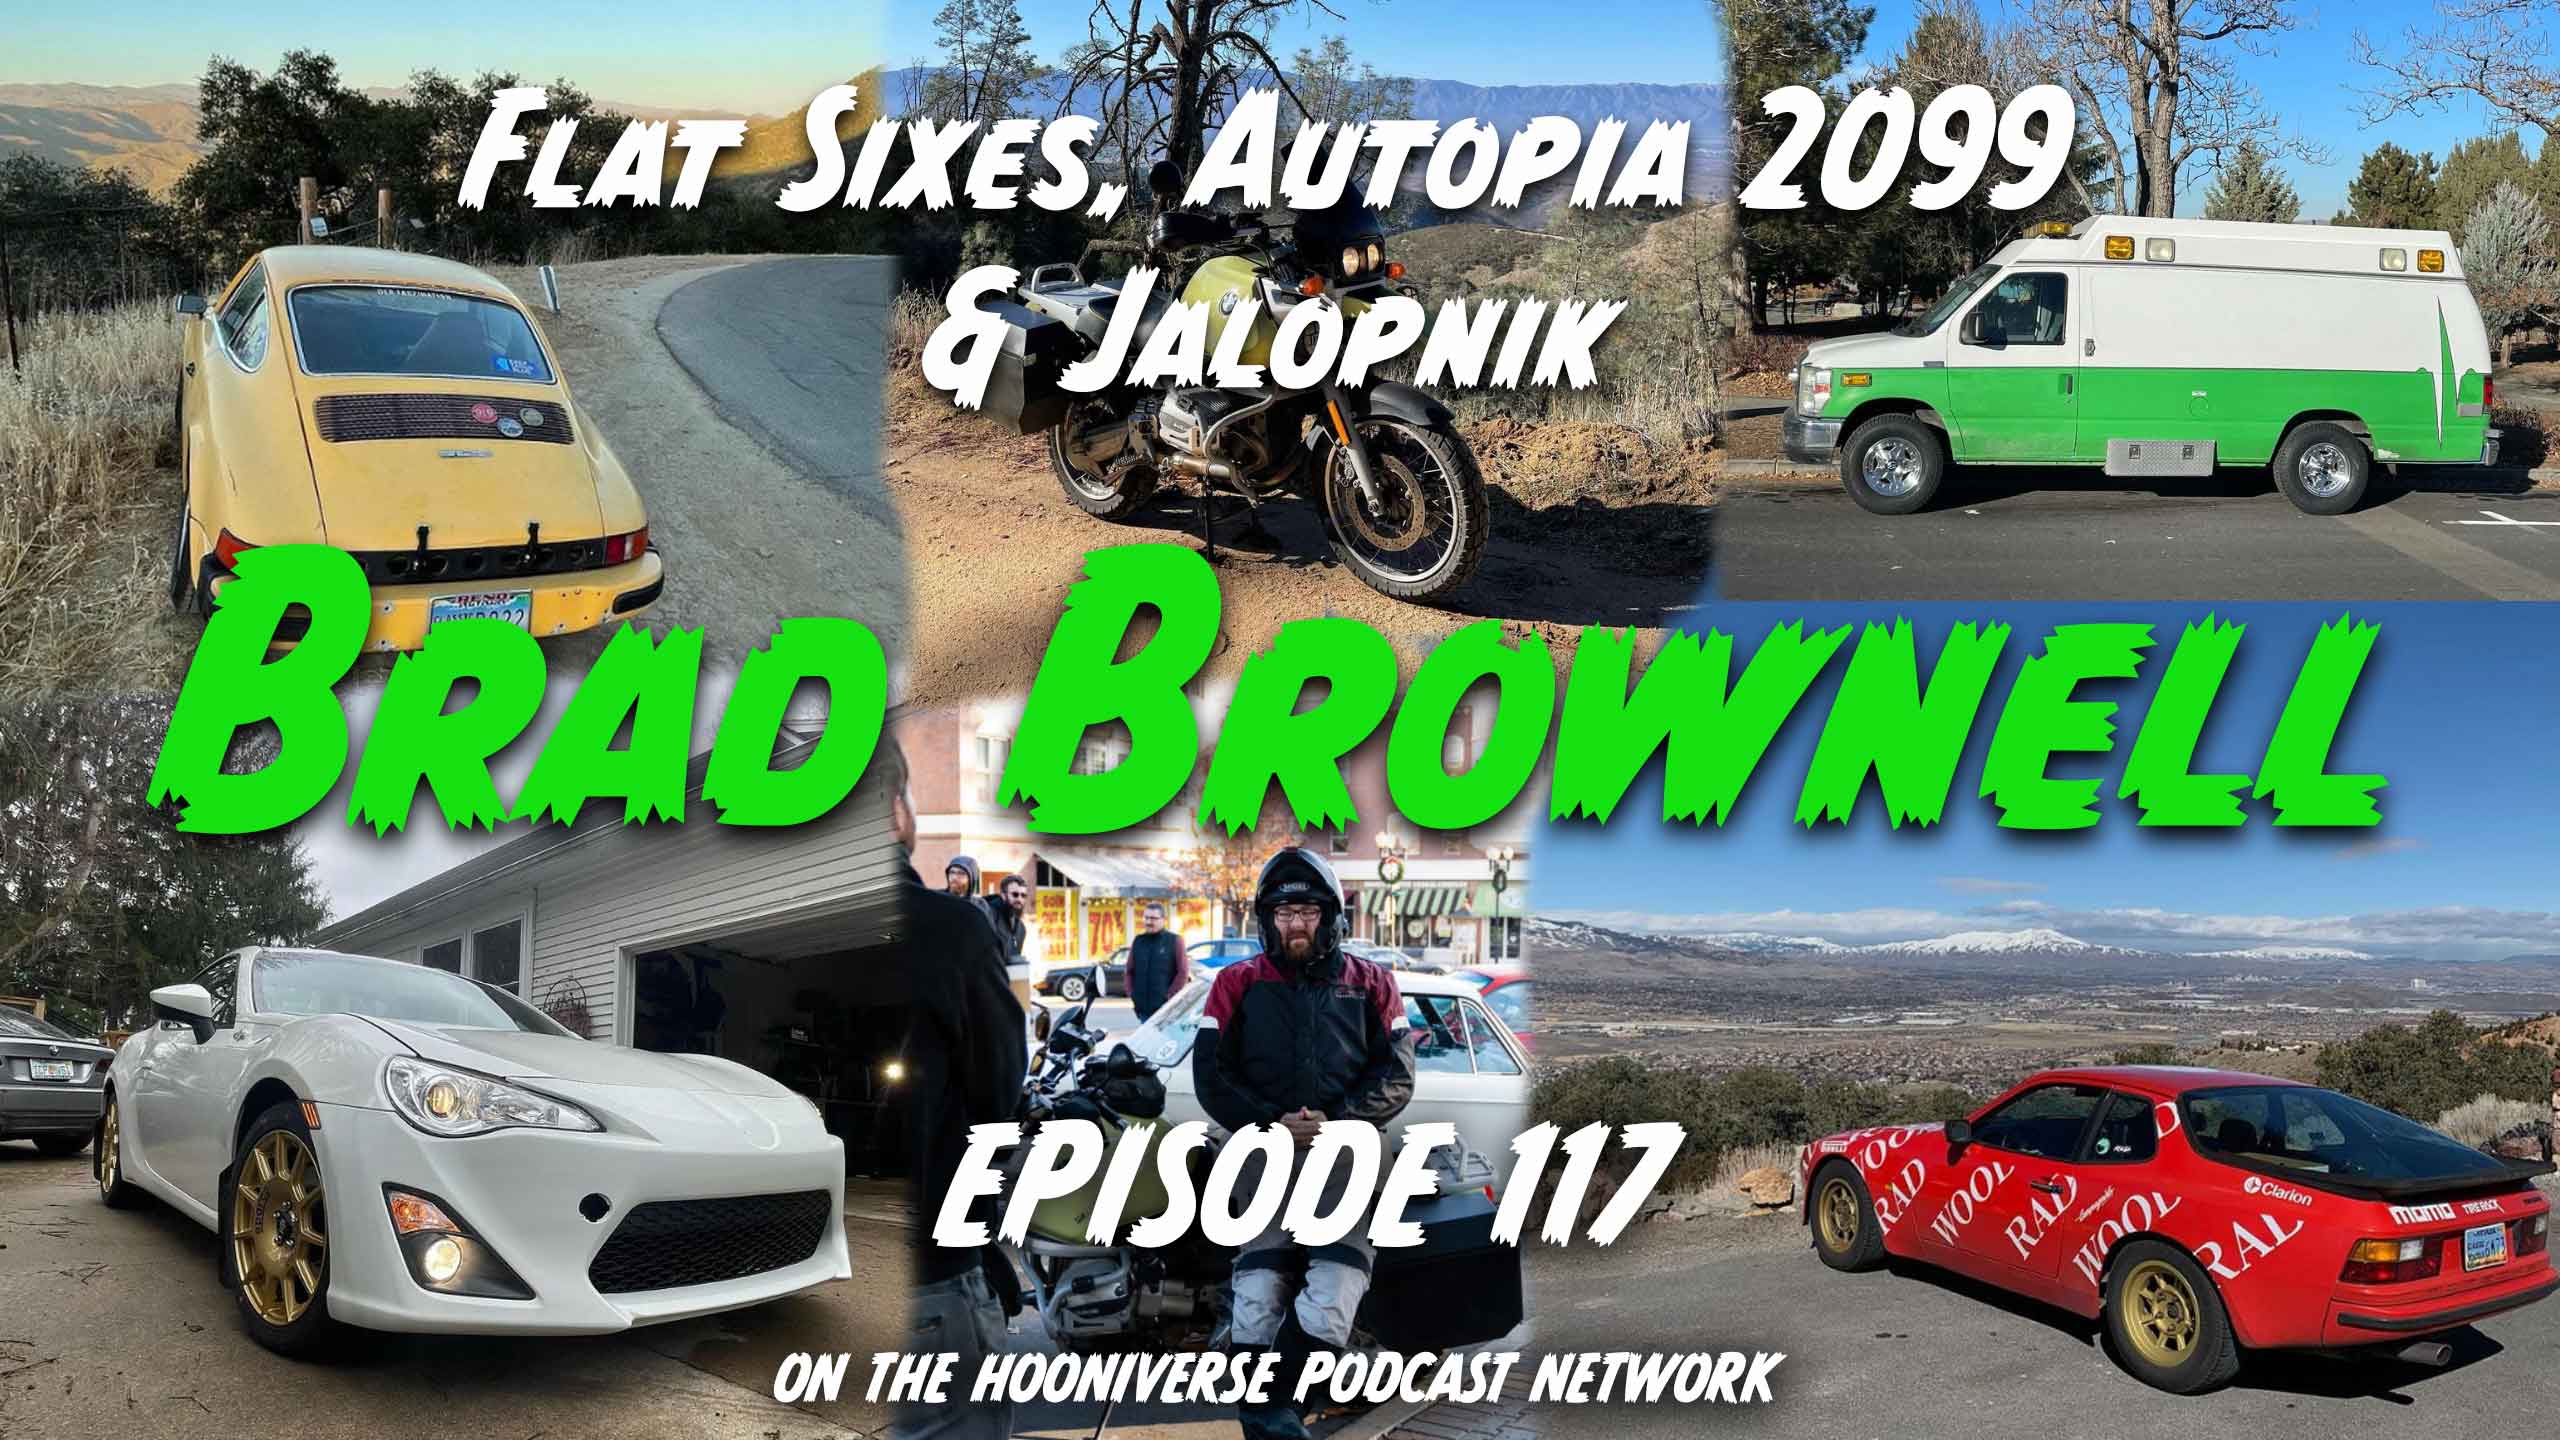 Brad-Brownell-Retruns-Off-The-Road-Again-Podcast-Episode-117